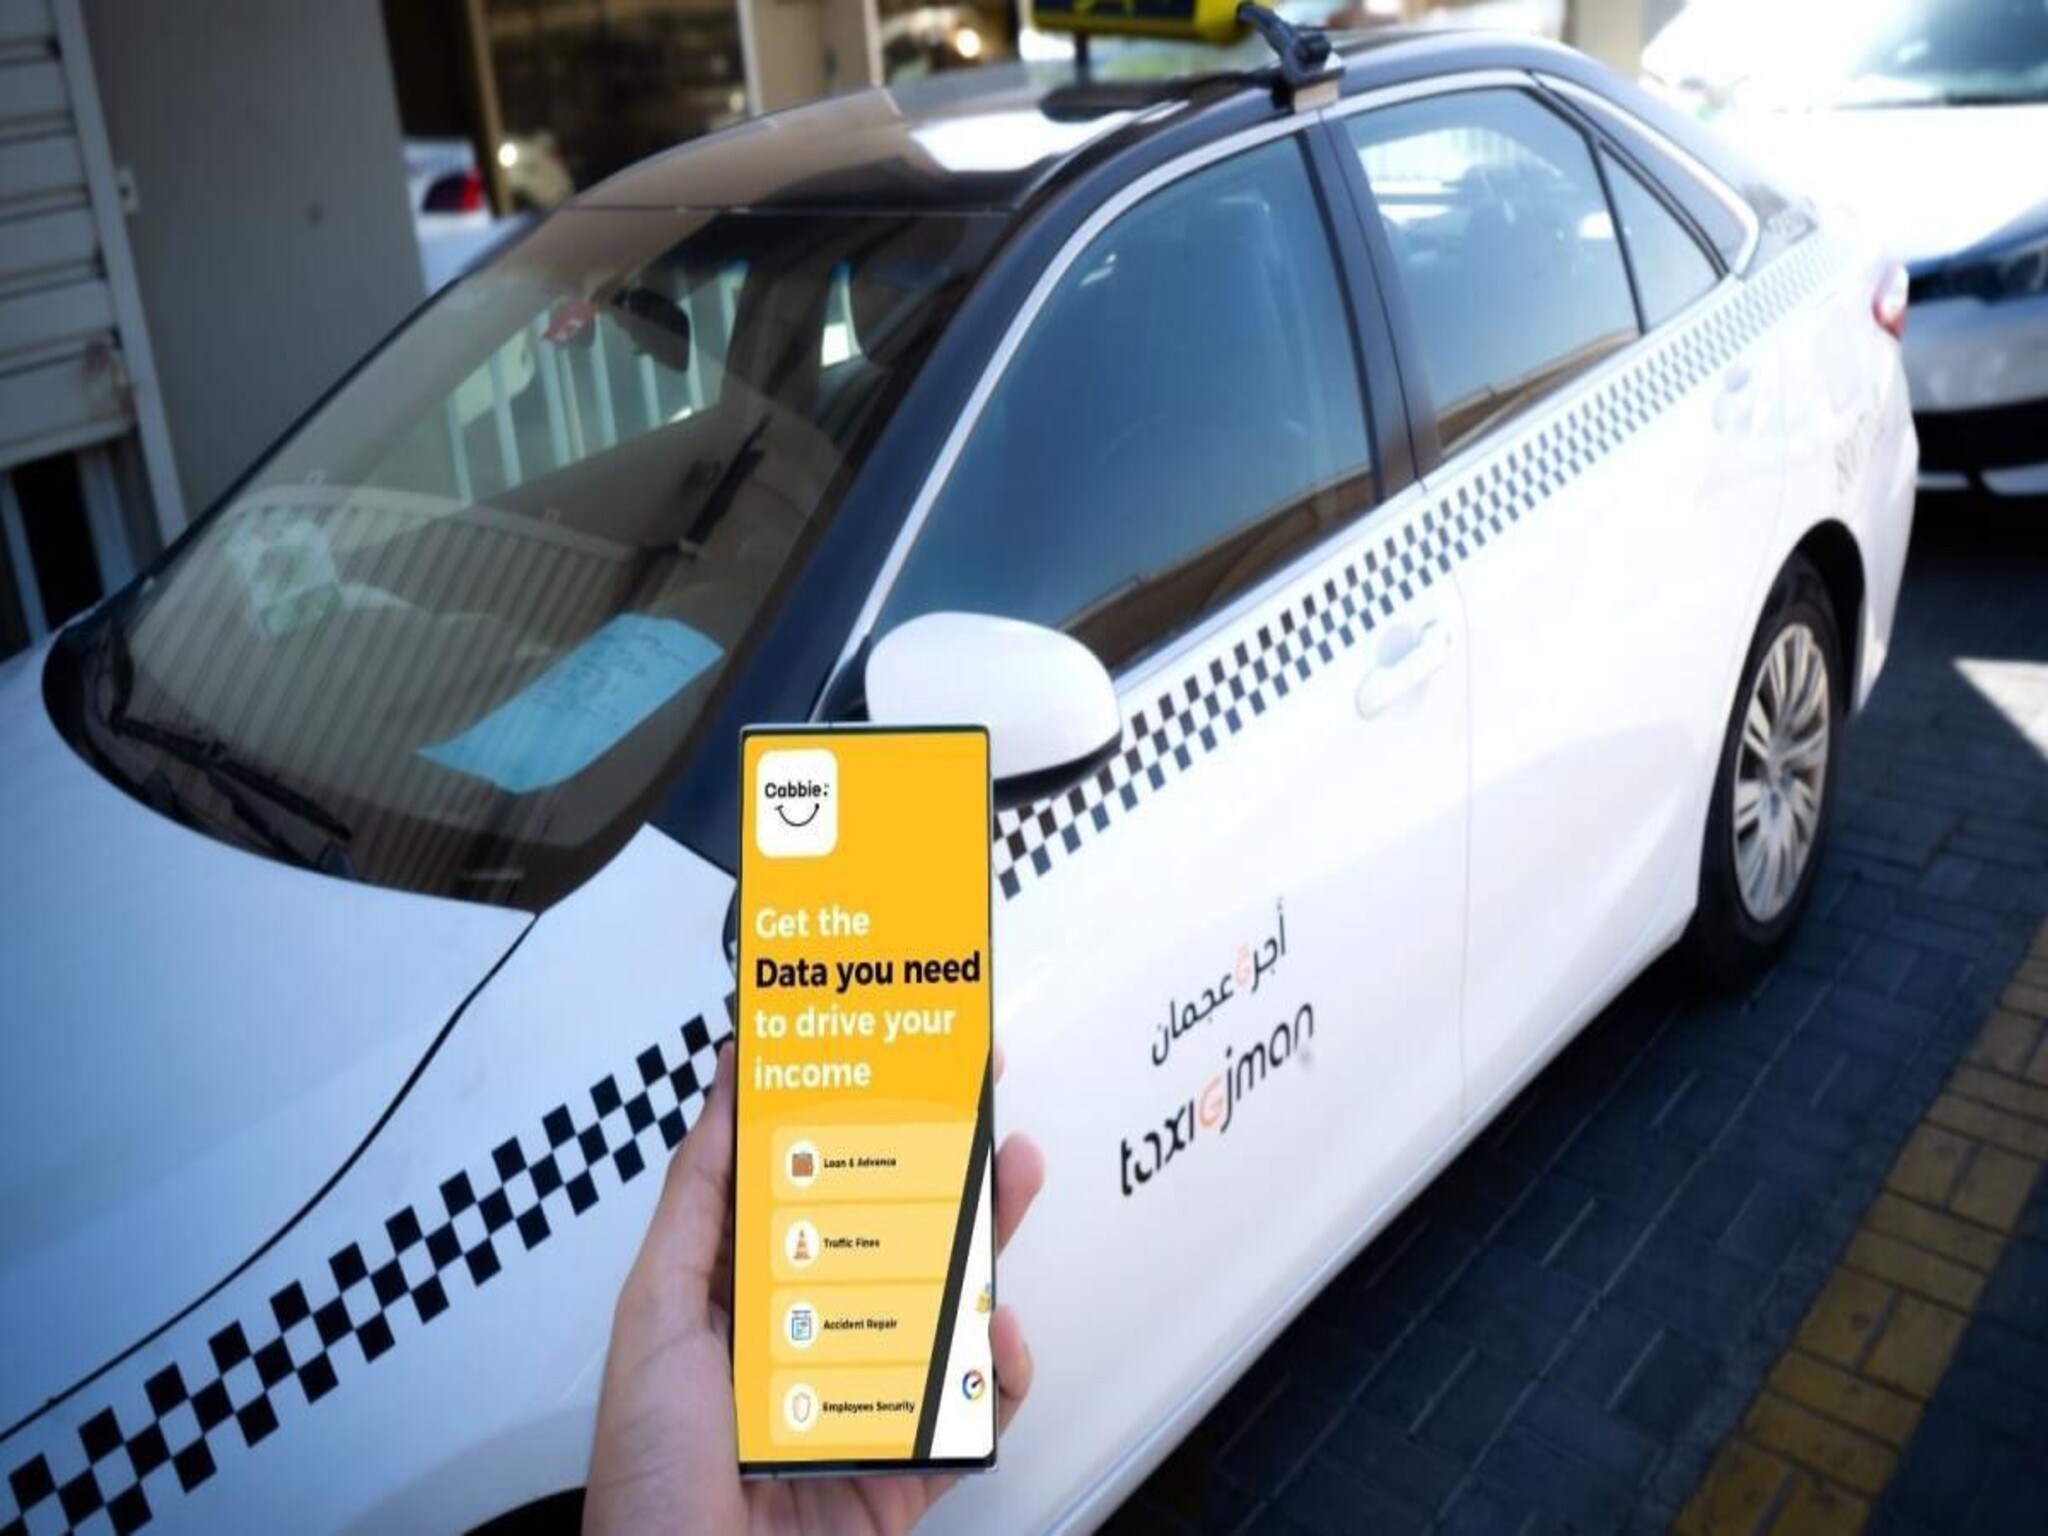 The authorities announce a reduction in taxi prices in the UAE in some areas